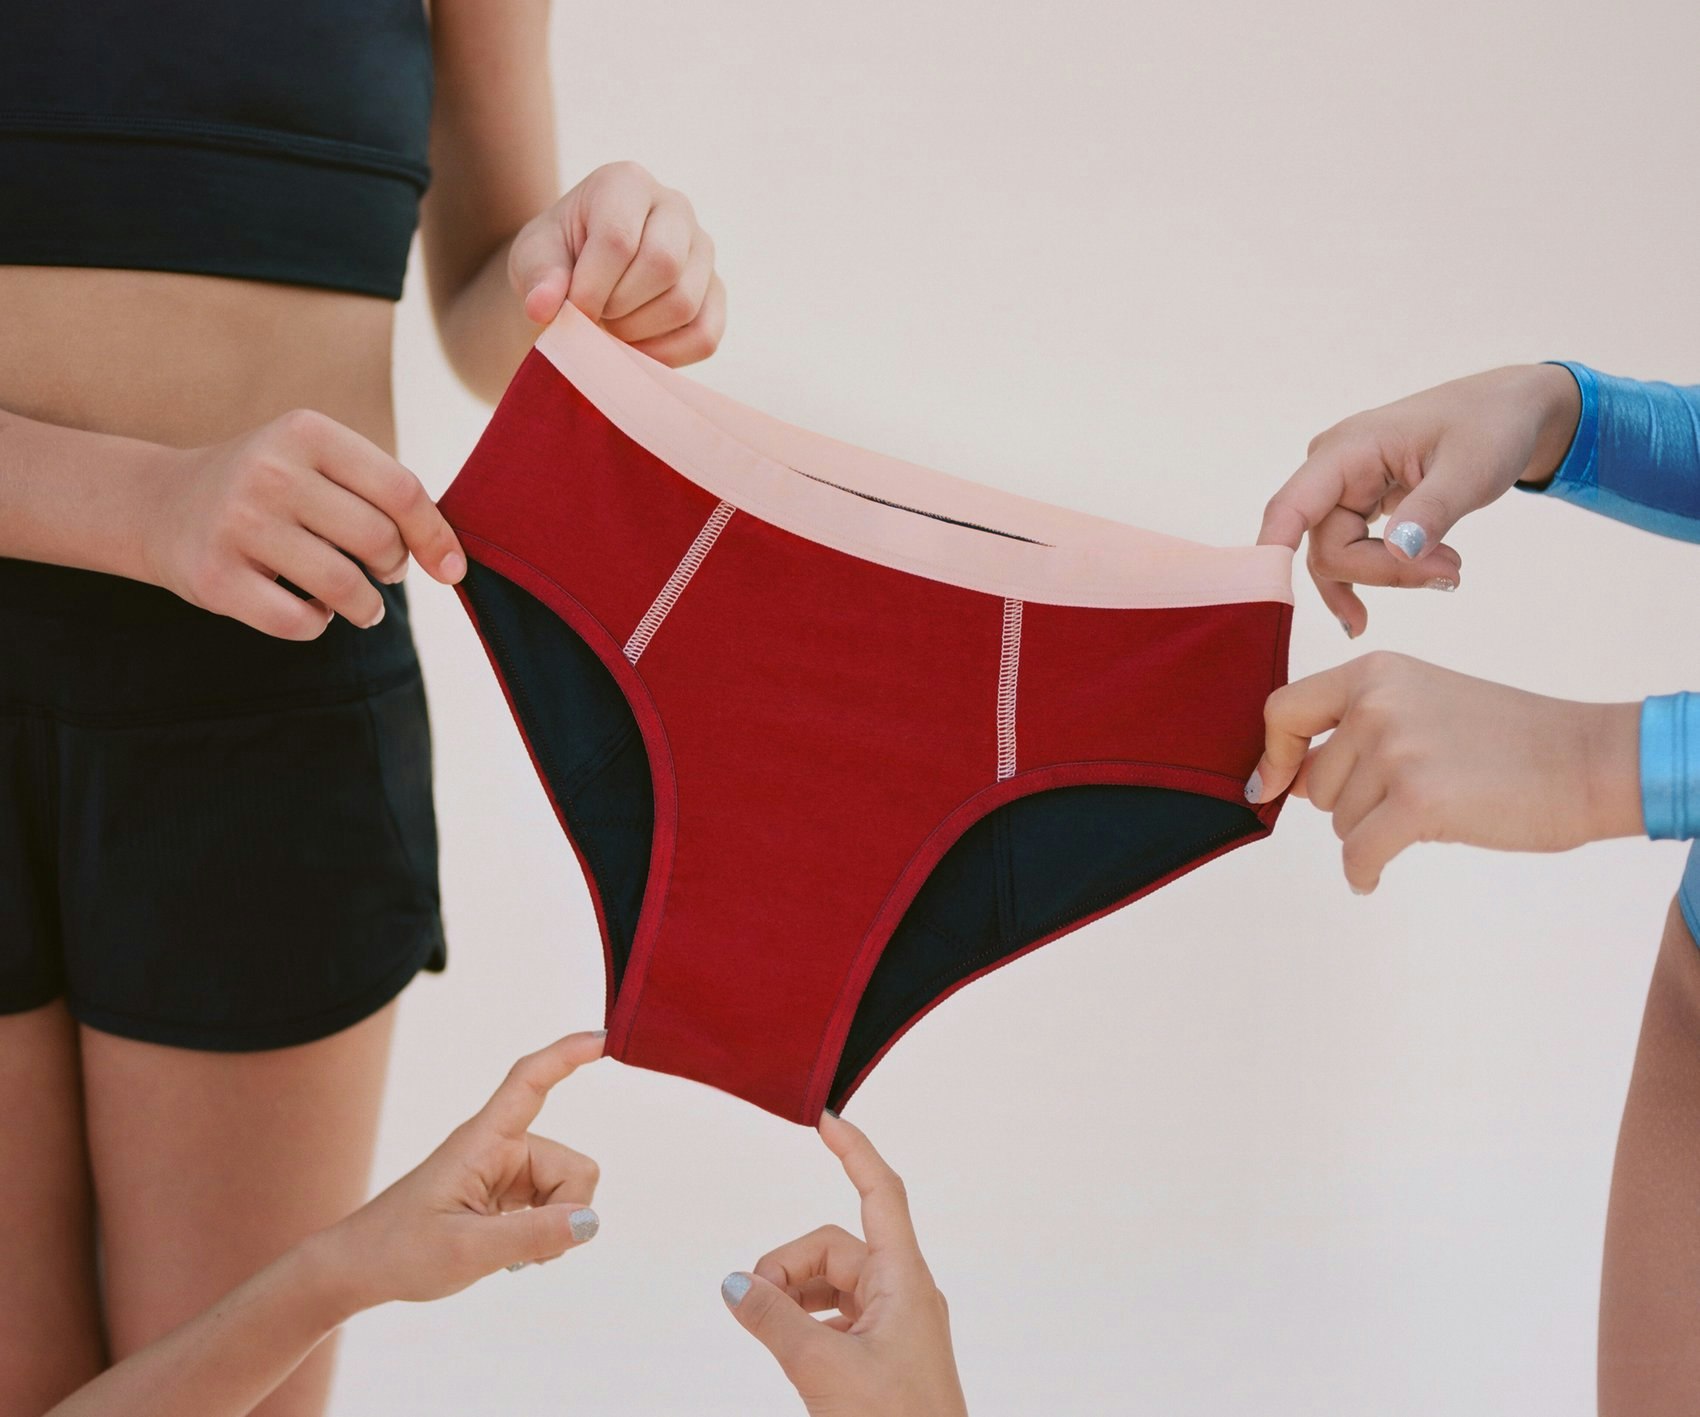 Thinx  For People with Periods